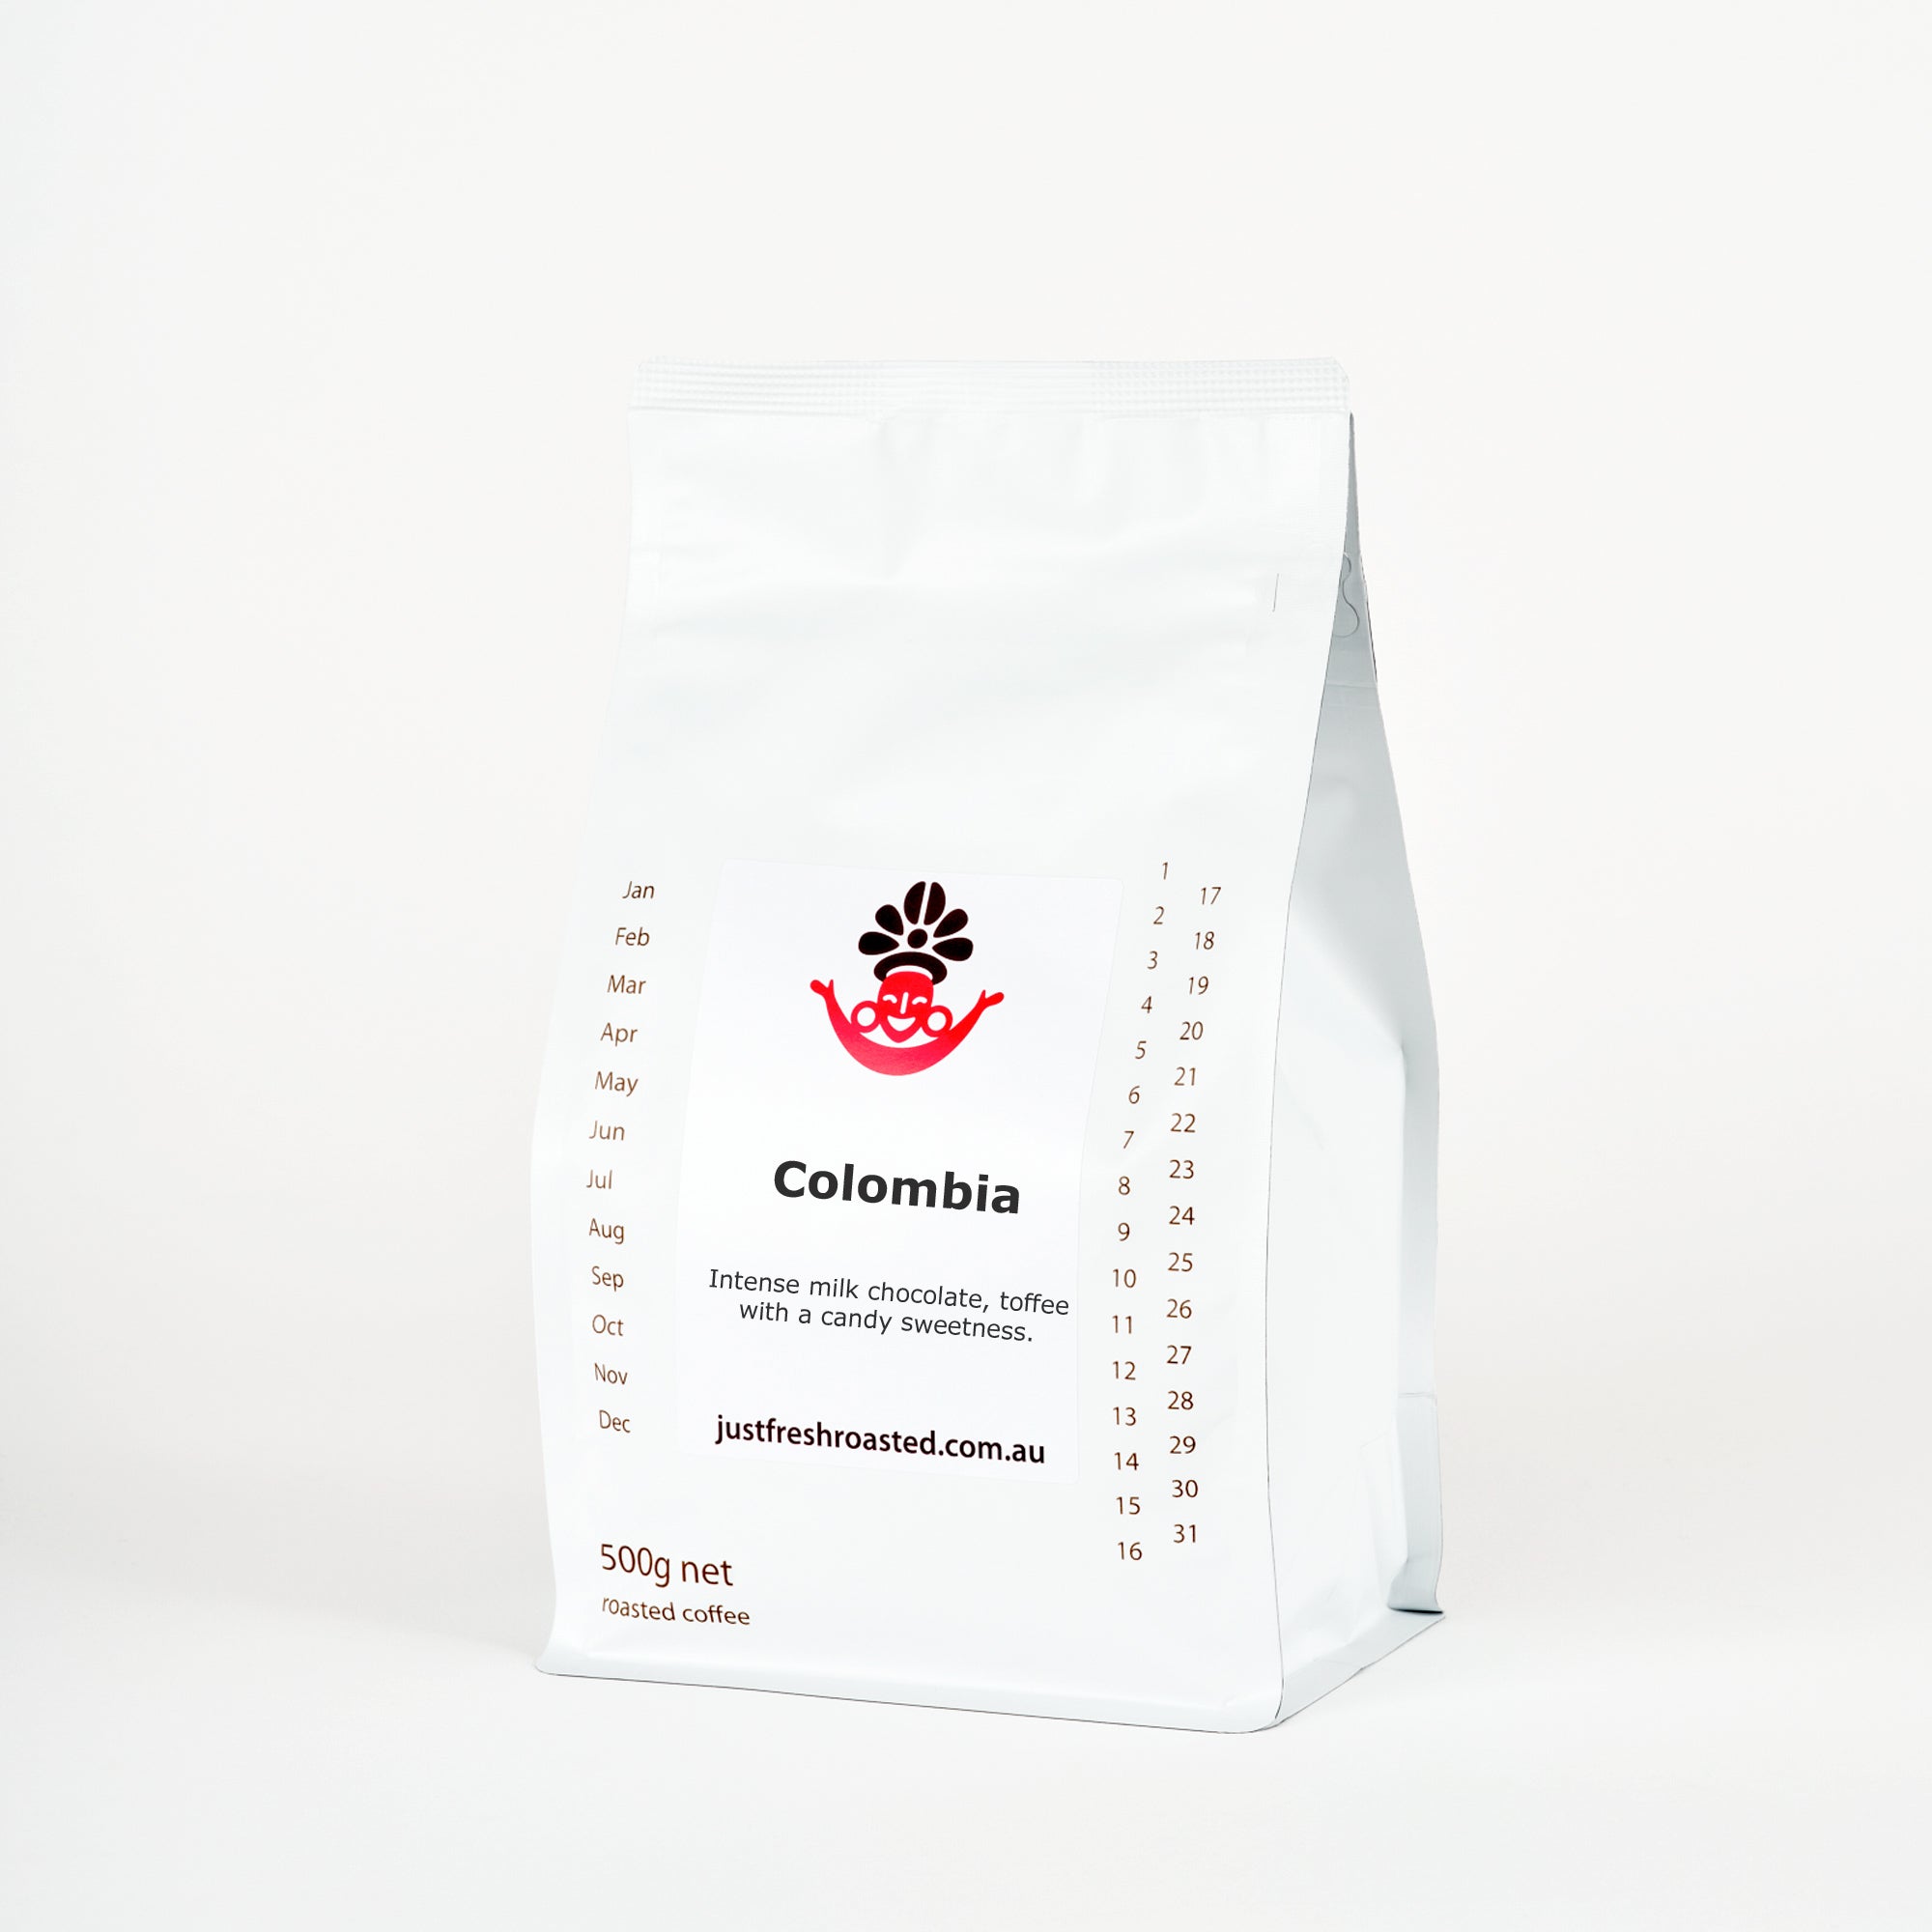 500g bag of quality simgle origin Colombia roasted coffee beans